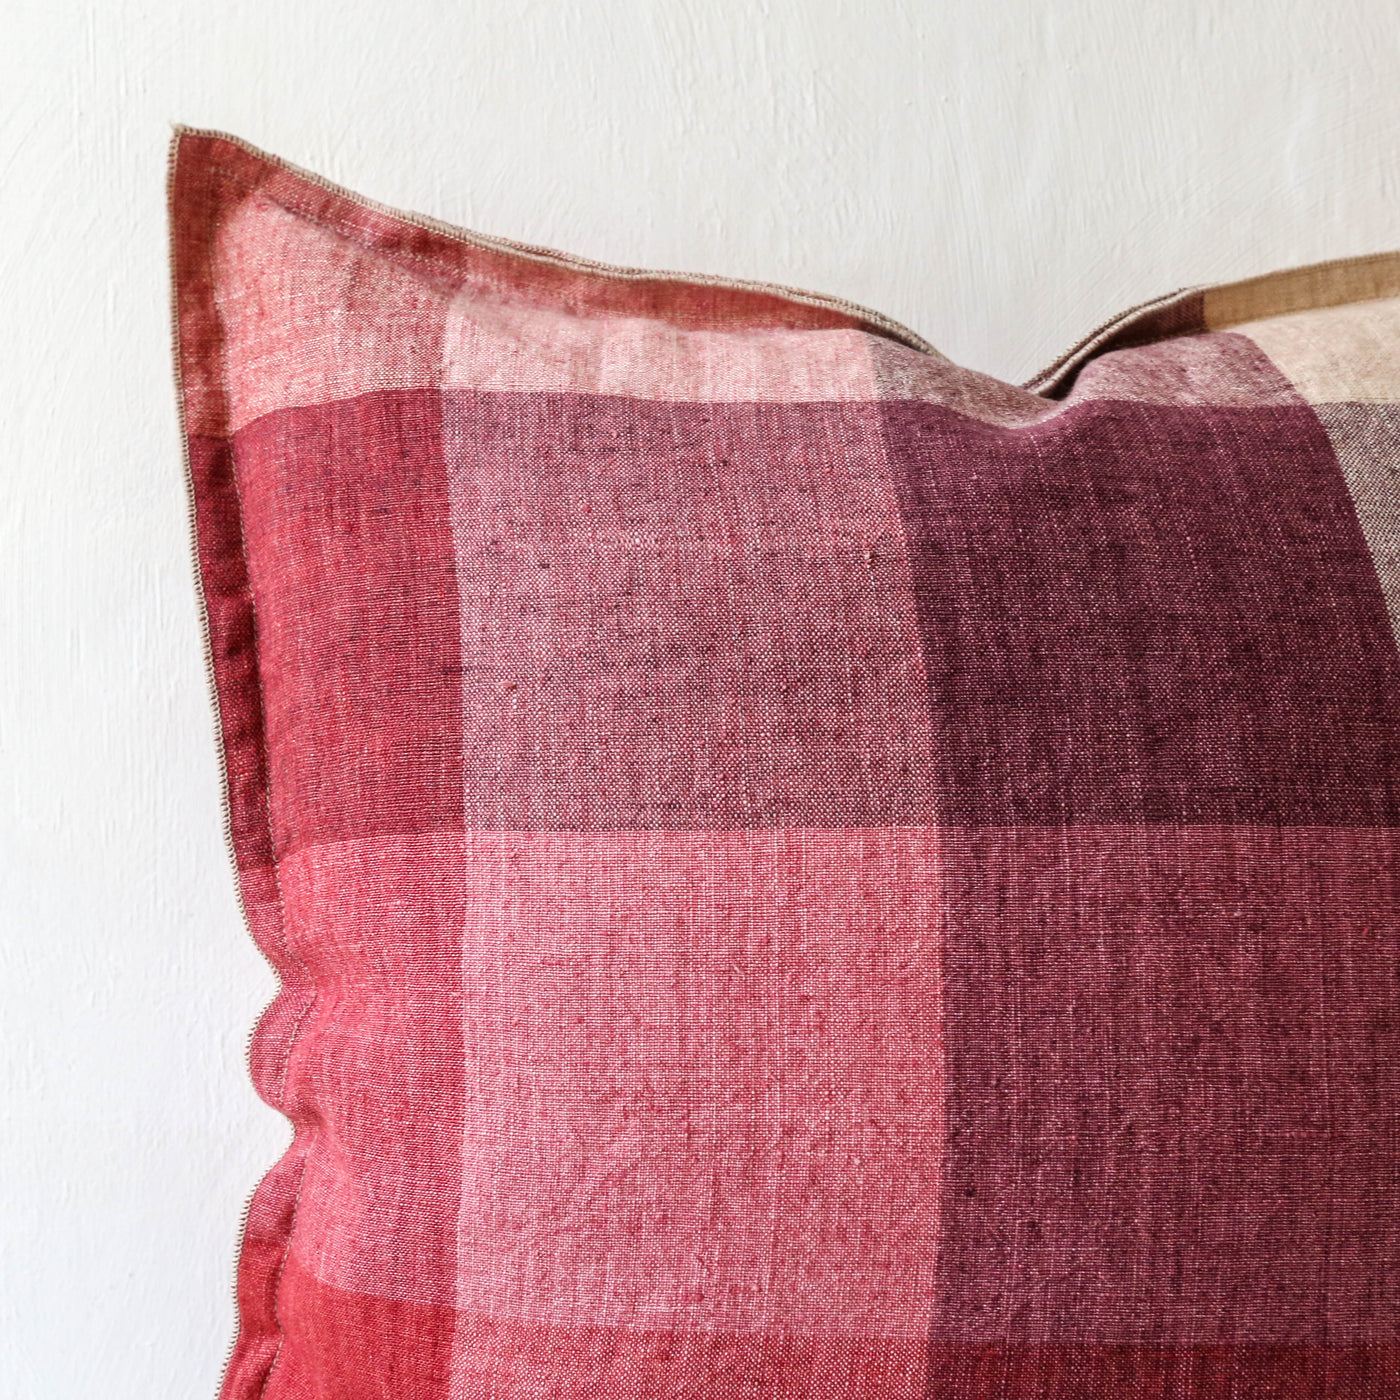 Linen Check Cushion Cover - Old Rose 50cm